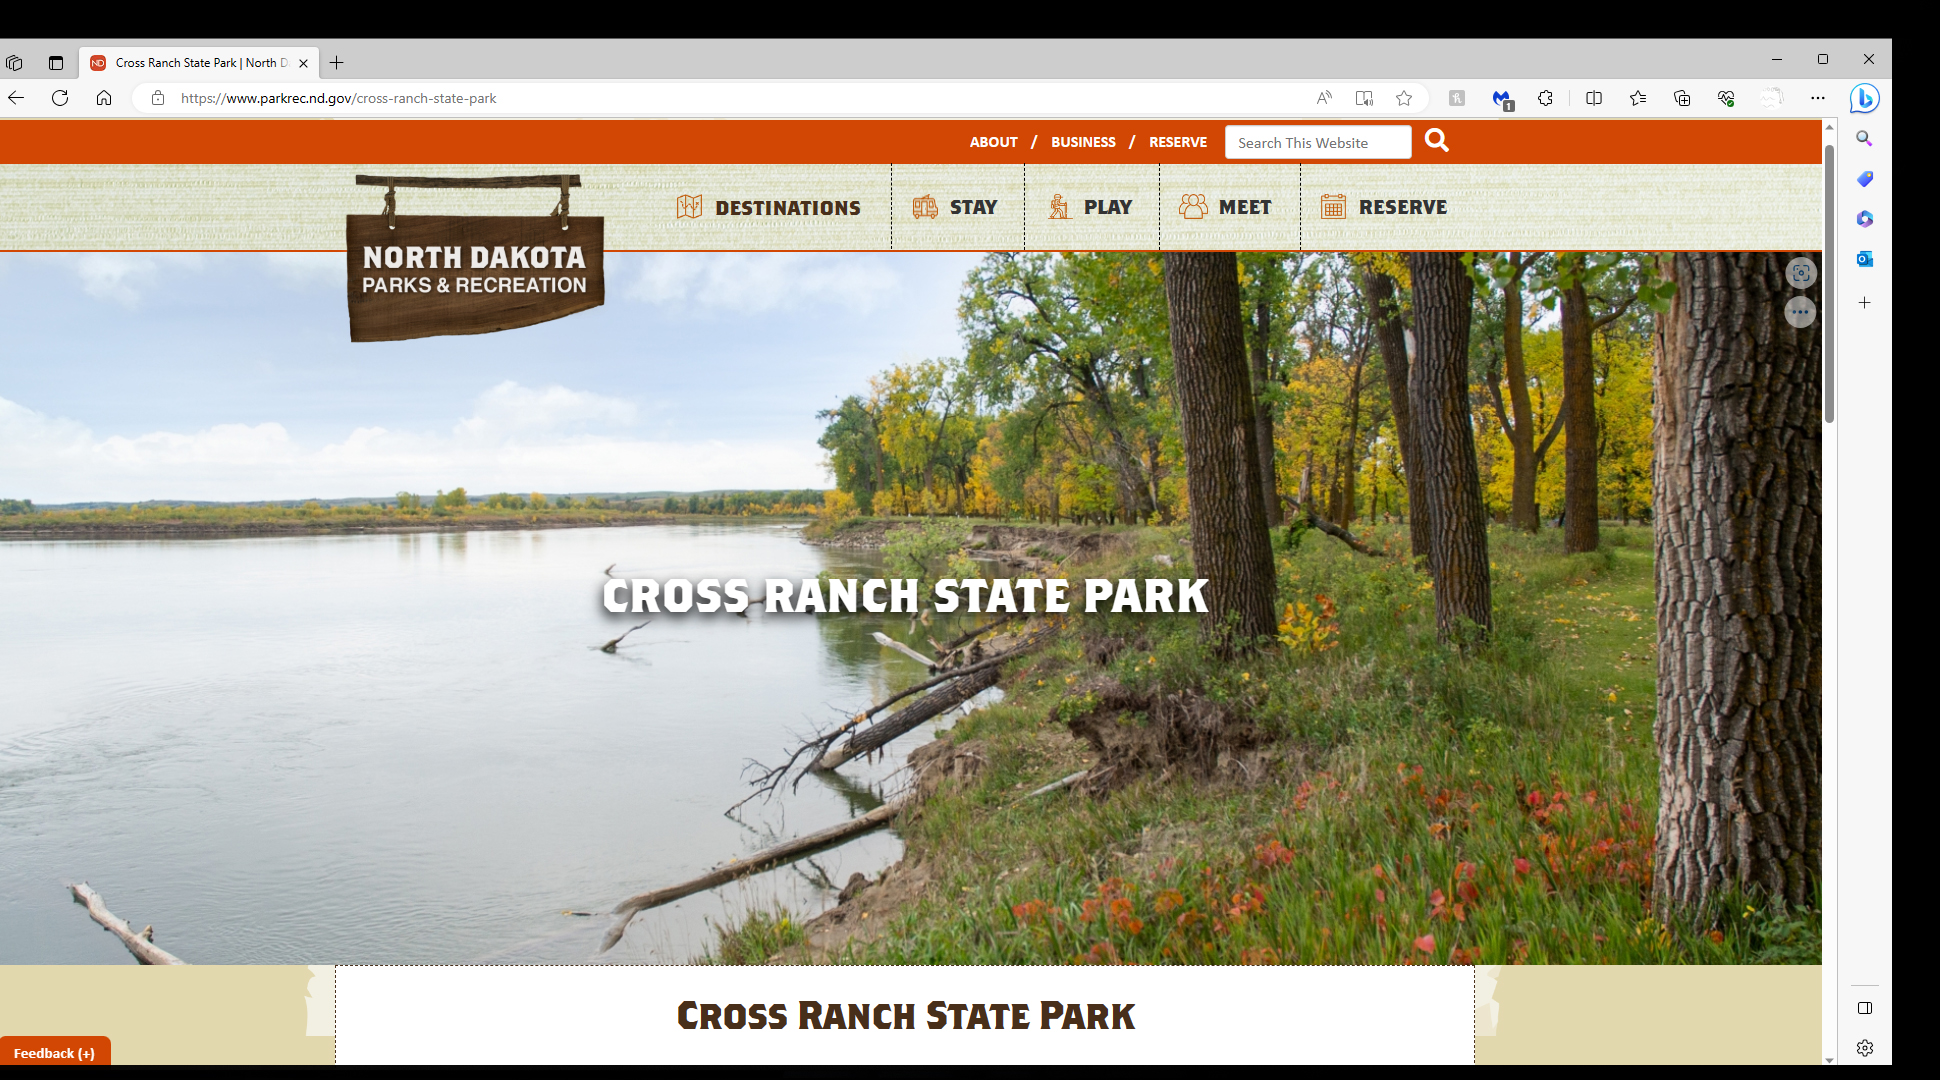 Cross Ranch State Park